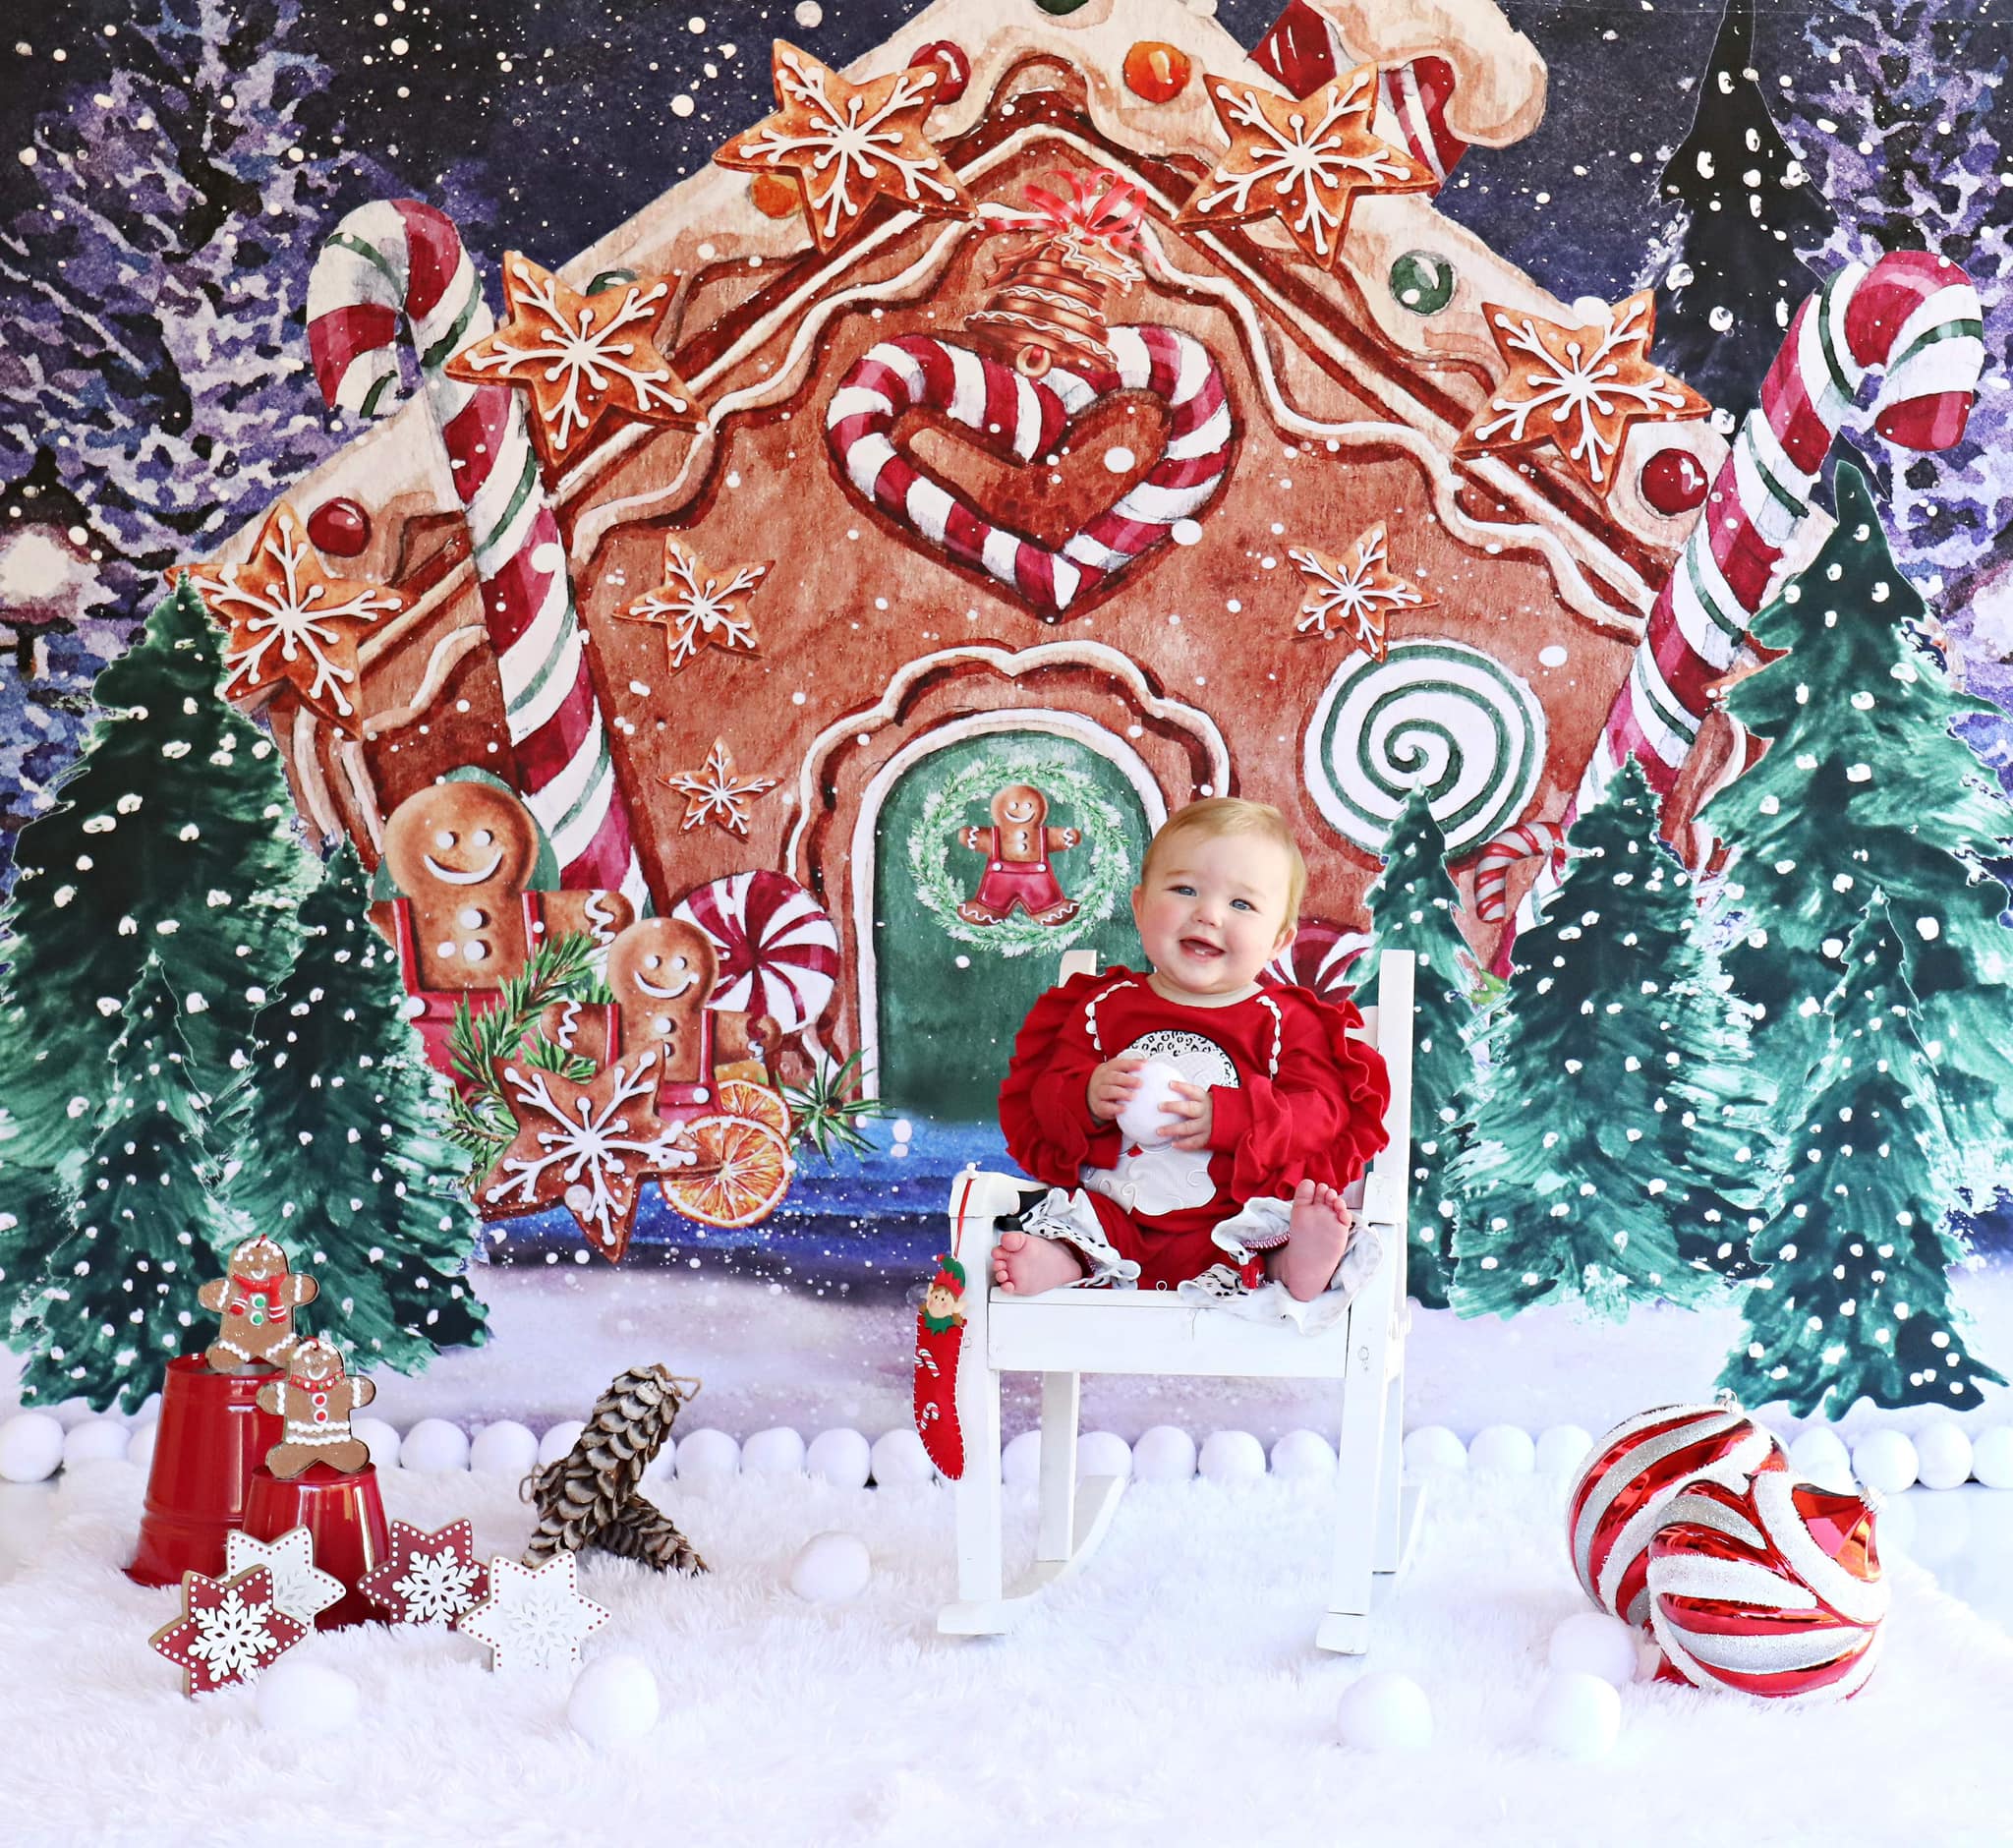 Kate Christmas Hot Cocoa Backdrop Outside Gingerbread House Designed by GQ